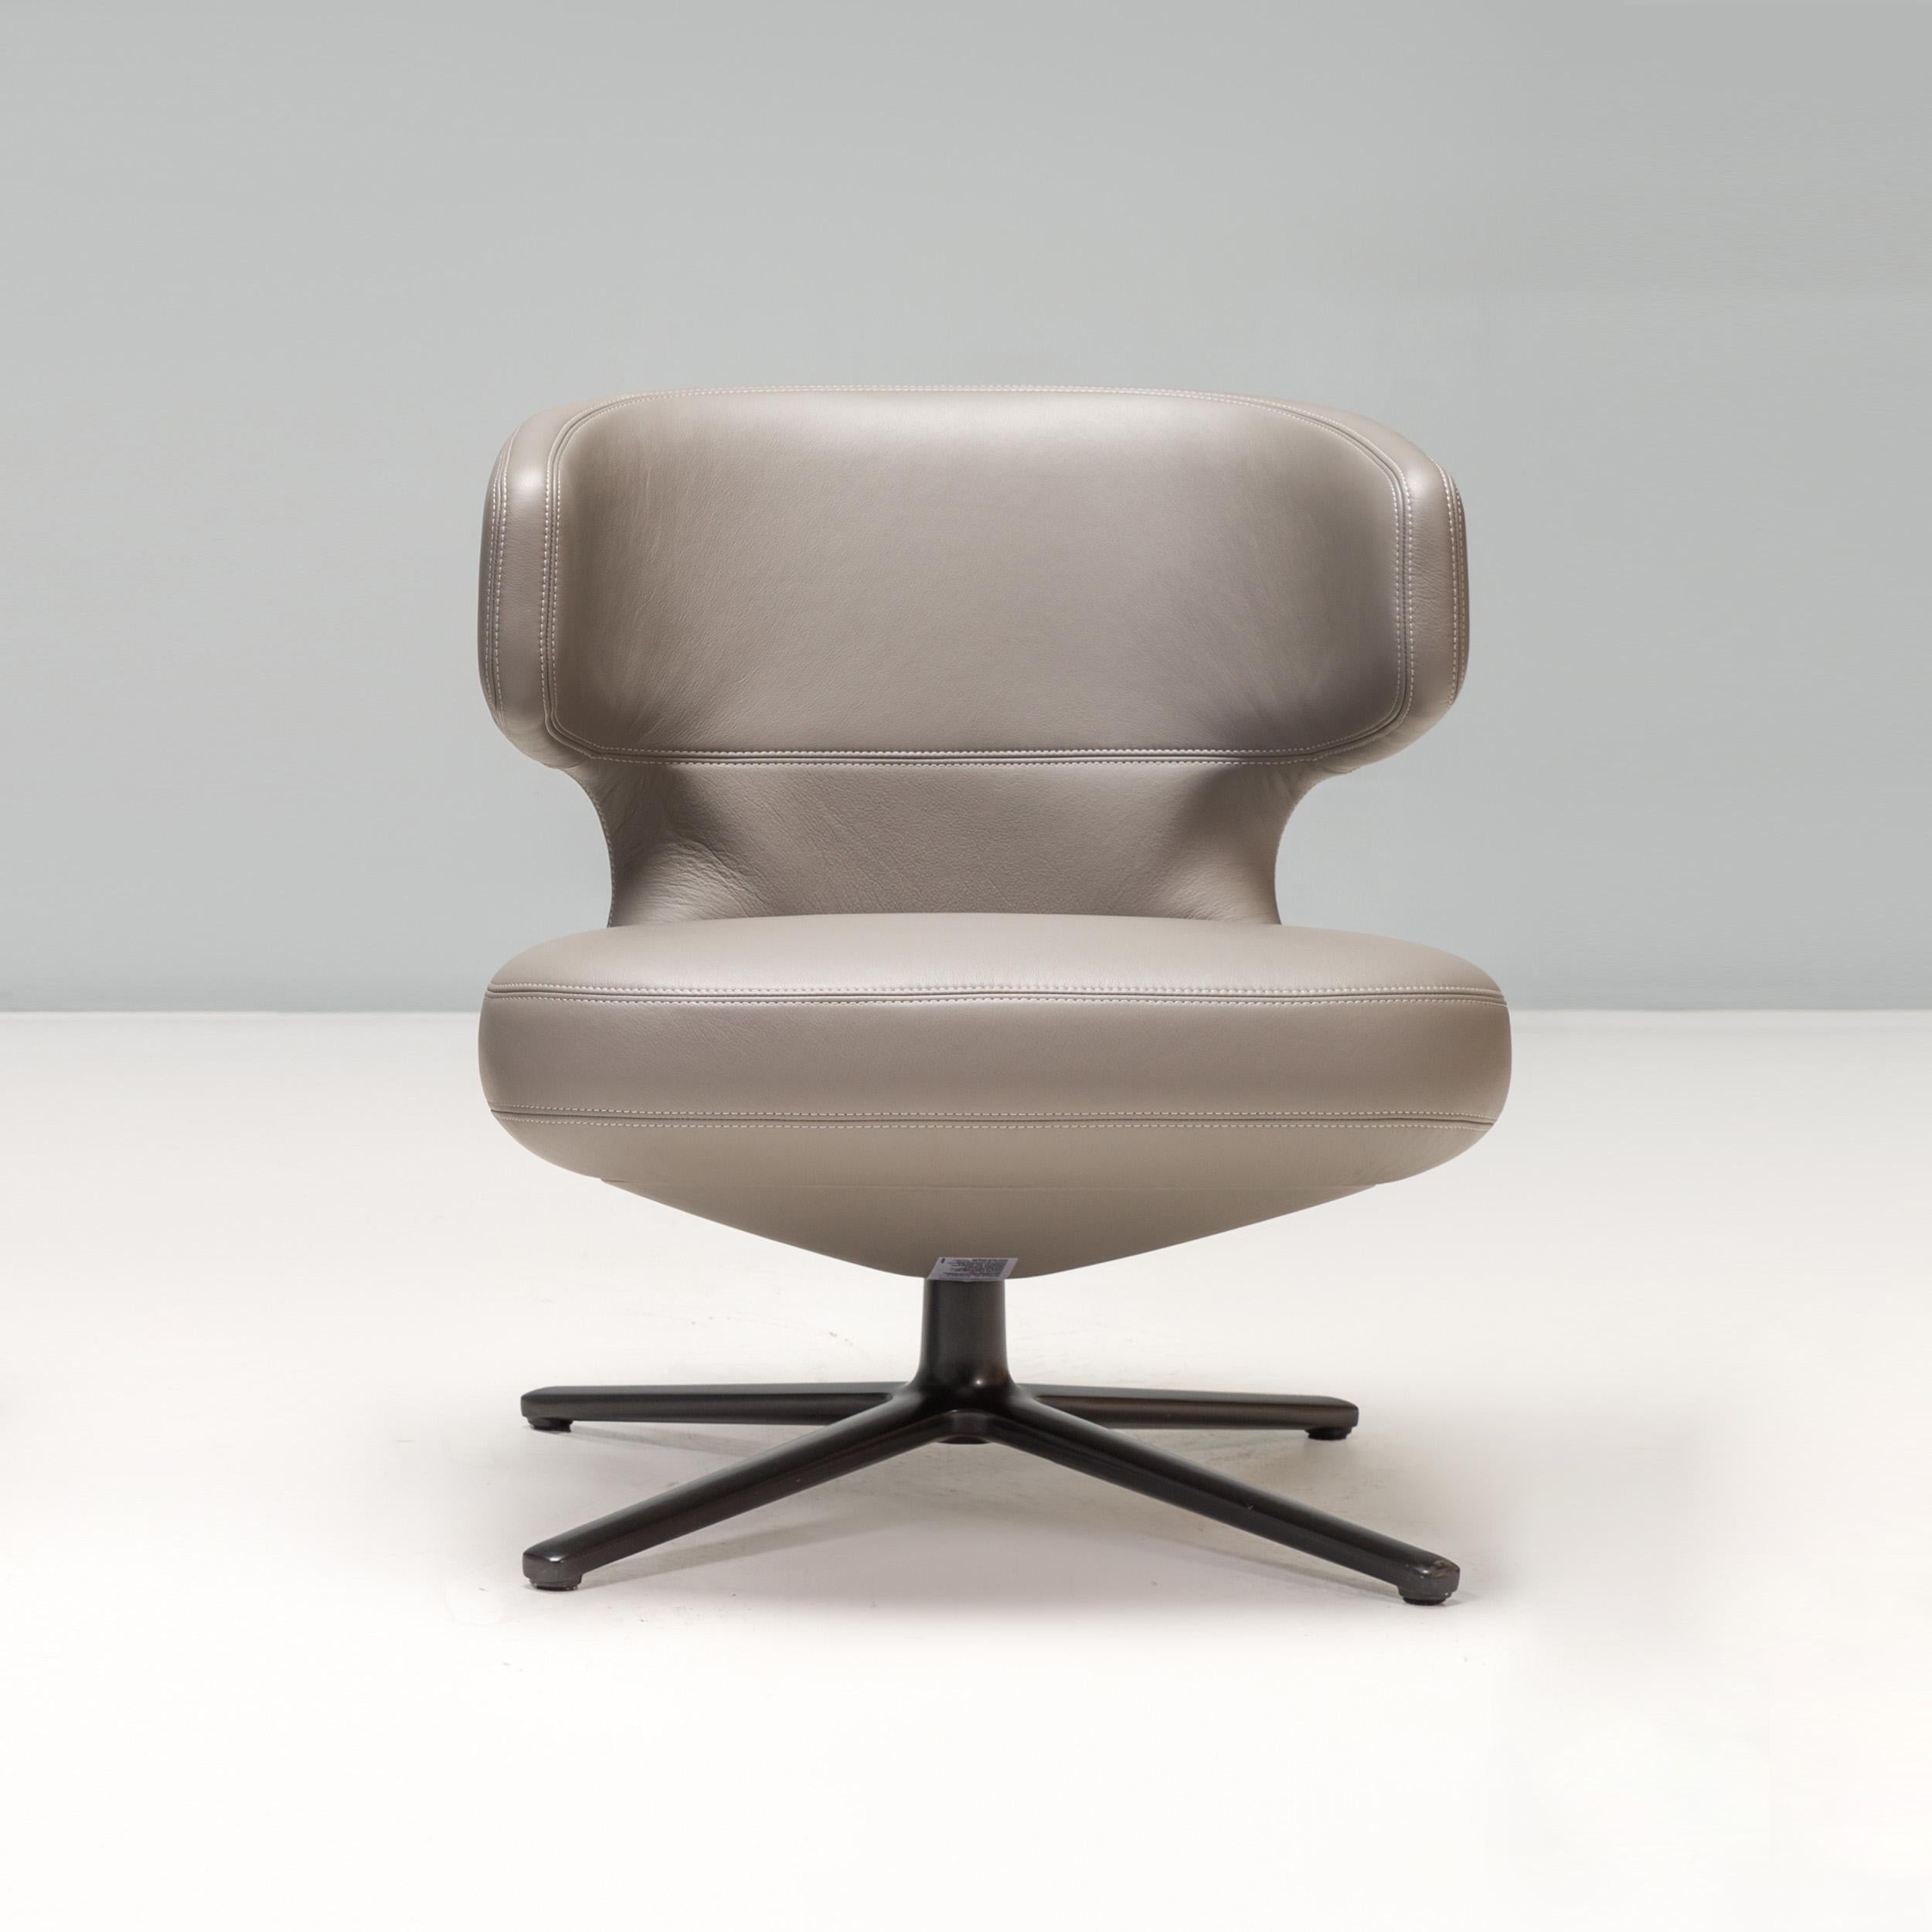 Designed by Antonio Citterio, the Petit Repos chair was introduced to the Vitra collection in 2013.

The chair offers the same ultimate comfort of the larger Repos styles, but in a more compact shape. 

Upholstered in grey leather, the armchair